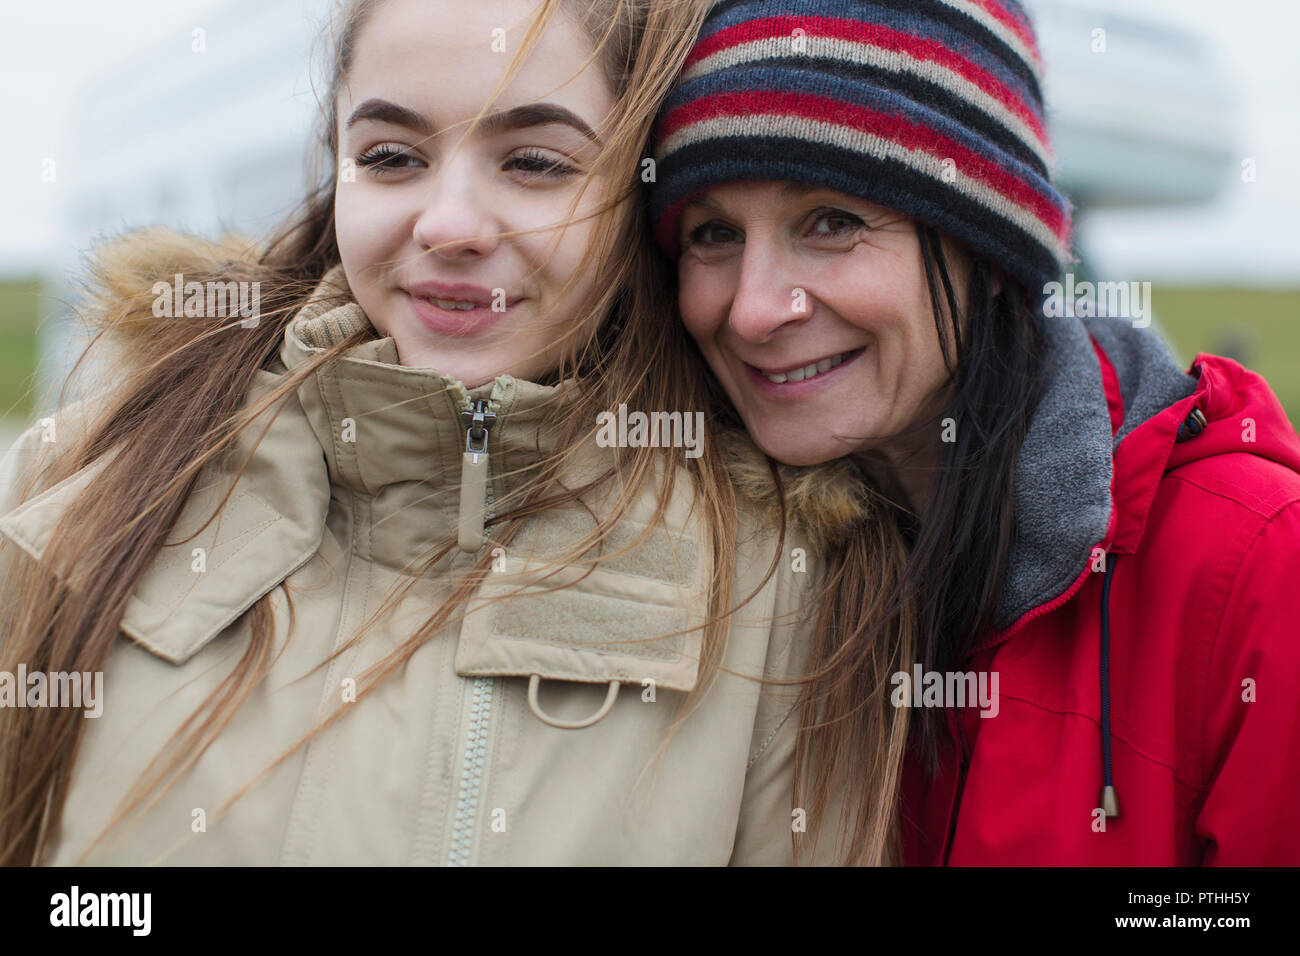 Smiling, affectionate mother and daughter in warm clothing Stock Photo